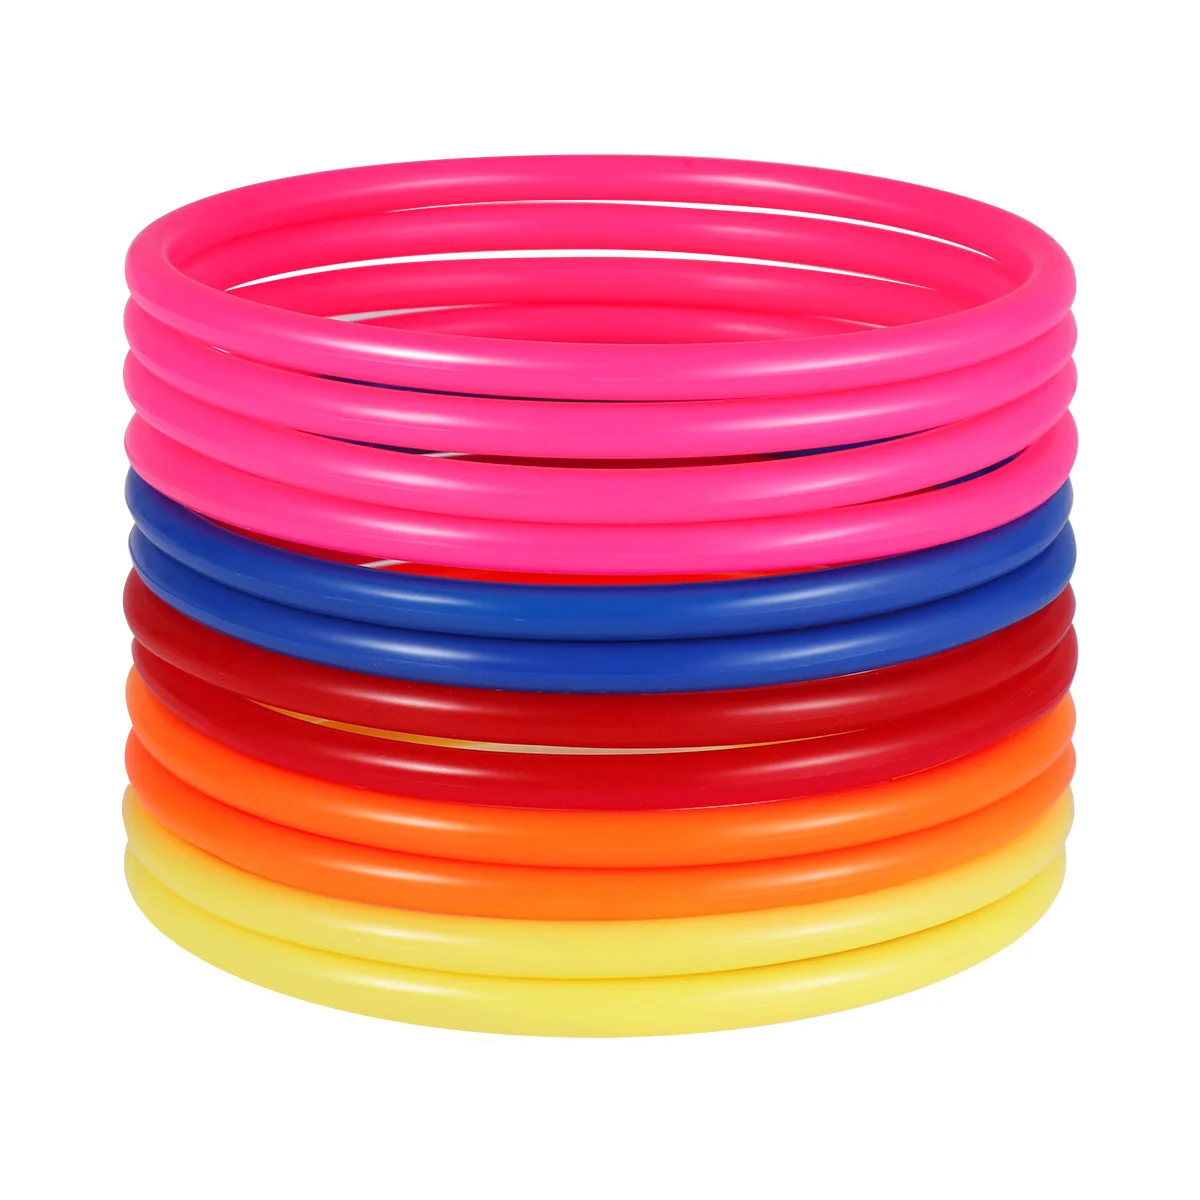 12PCS Ring Toss Game Rings Game Sets Educational Outdoor Throwing Funny Game Intelligence Development Parent- child Sports Game throwing rings circle ferrule stacked layers board game children outdoor sports montessori interactive stacking ferrule kids toy